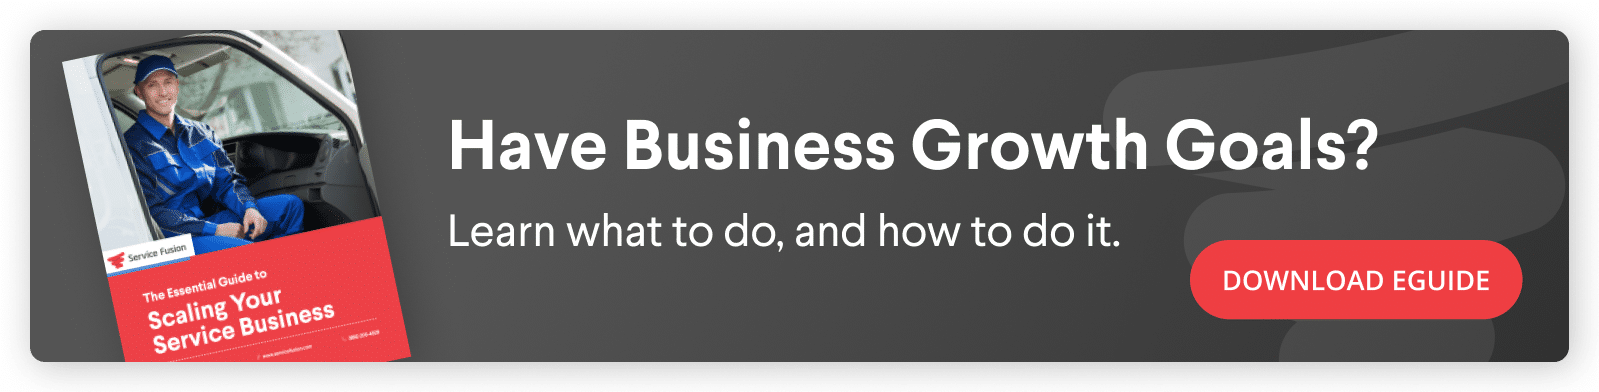 ebook image business growth goals